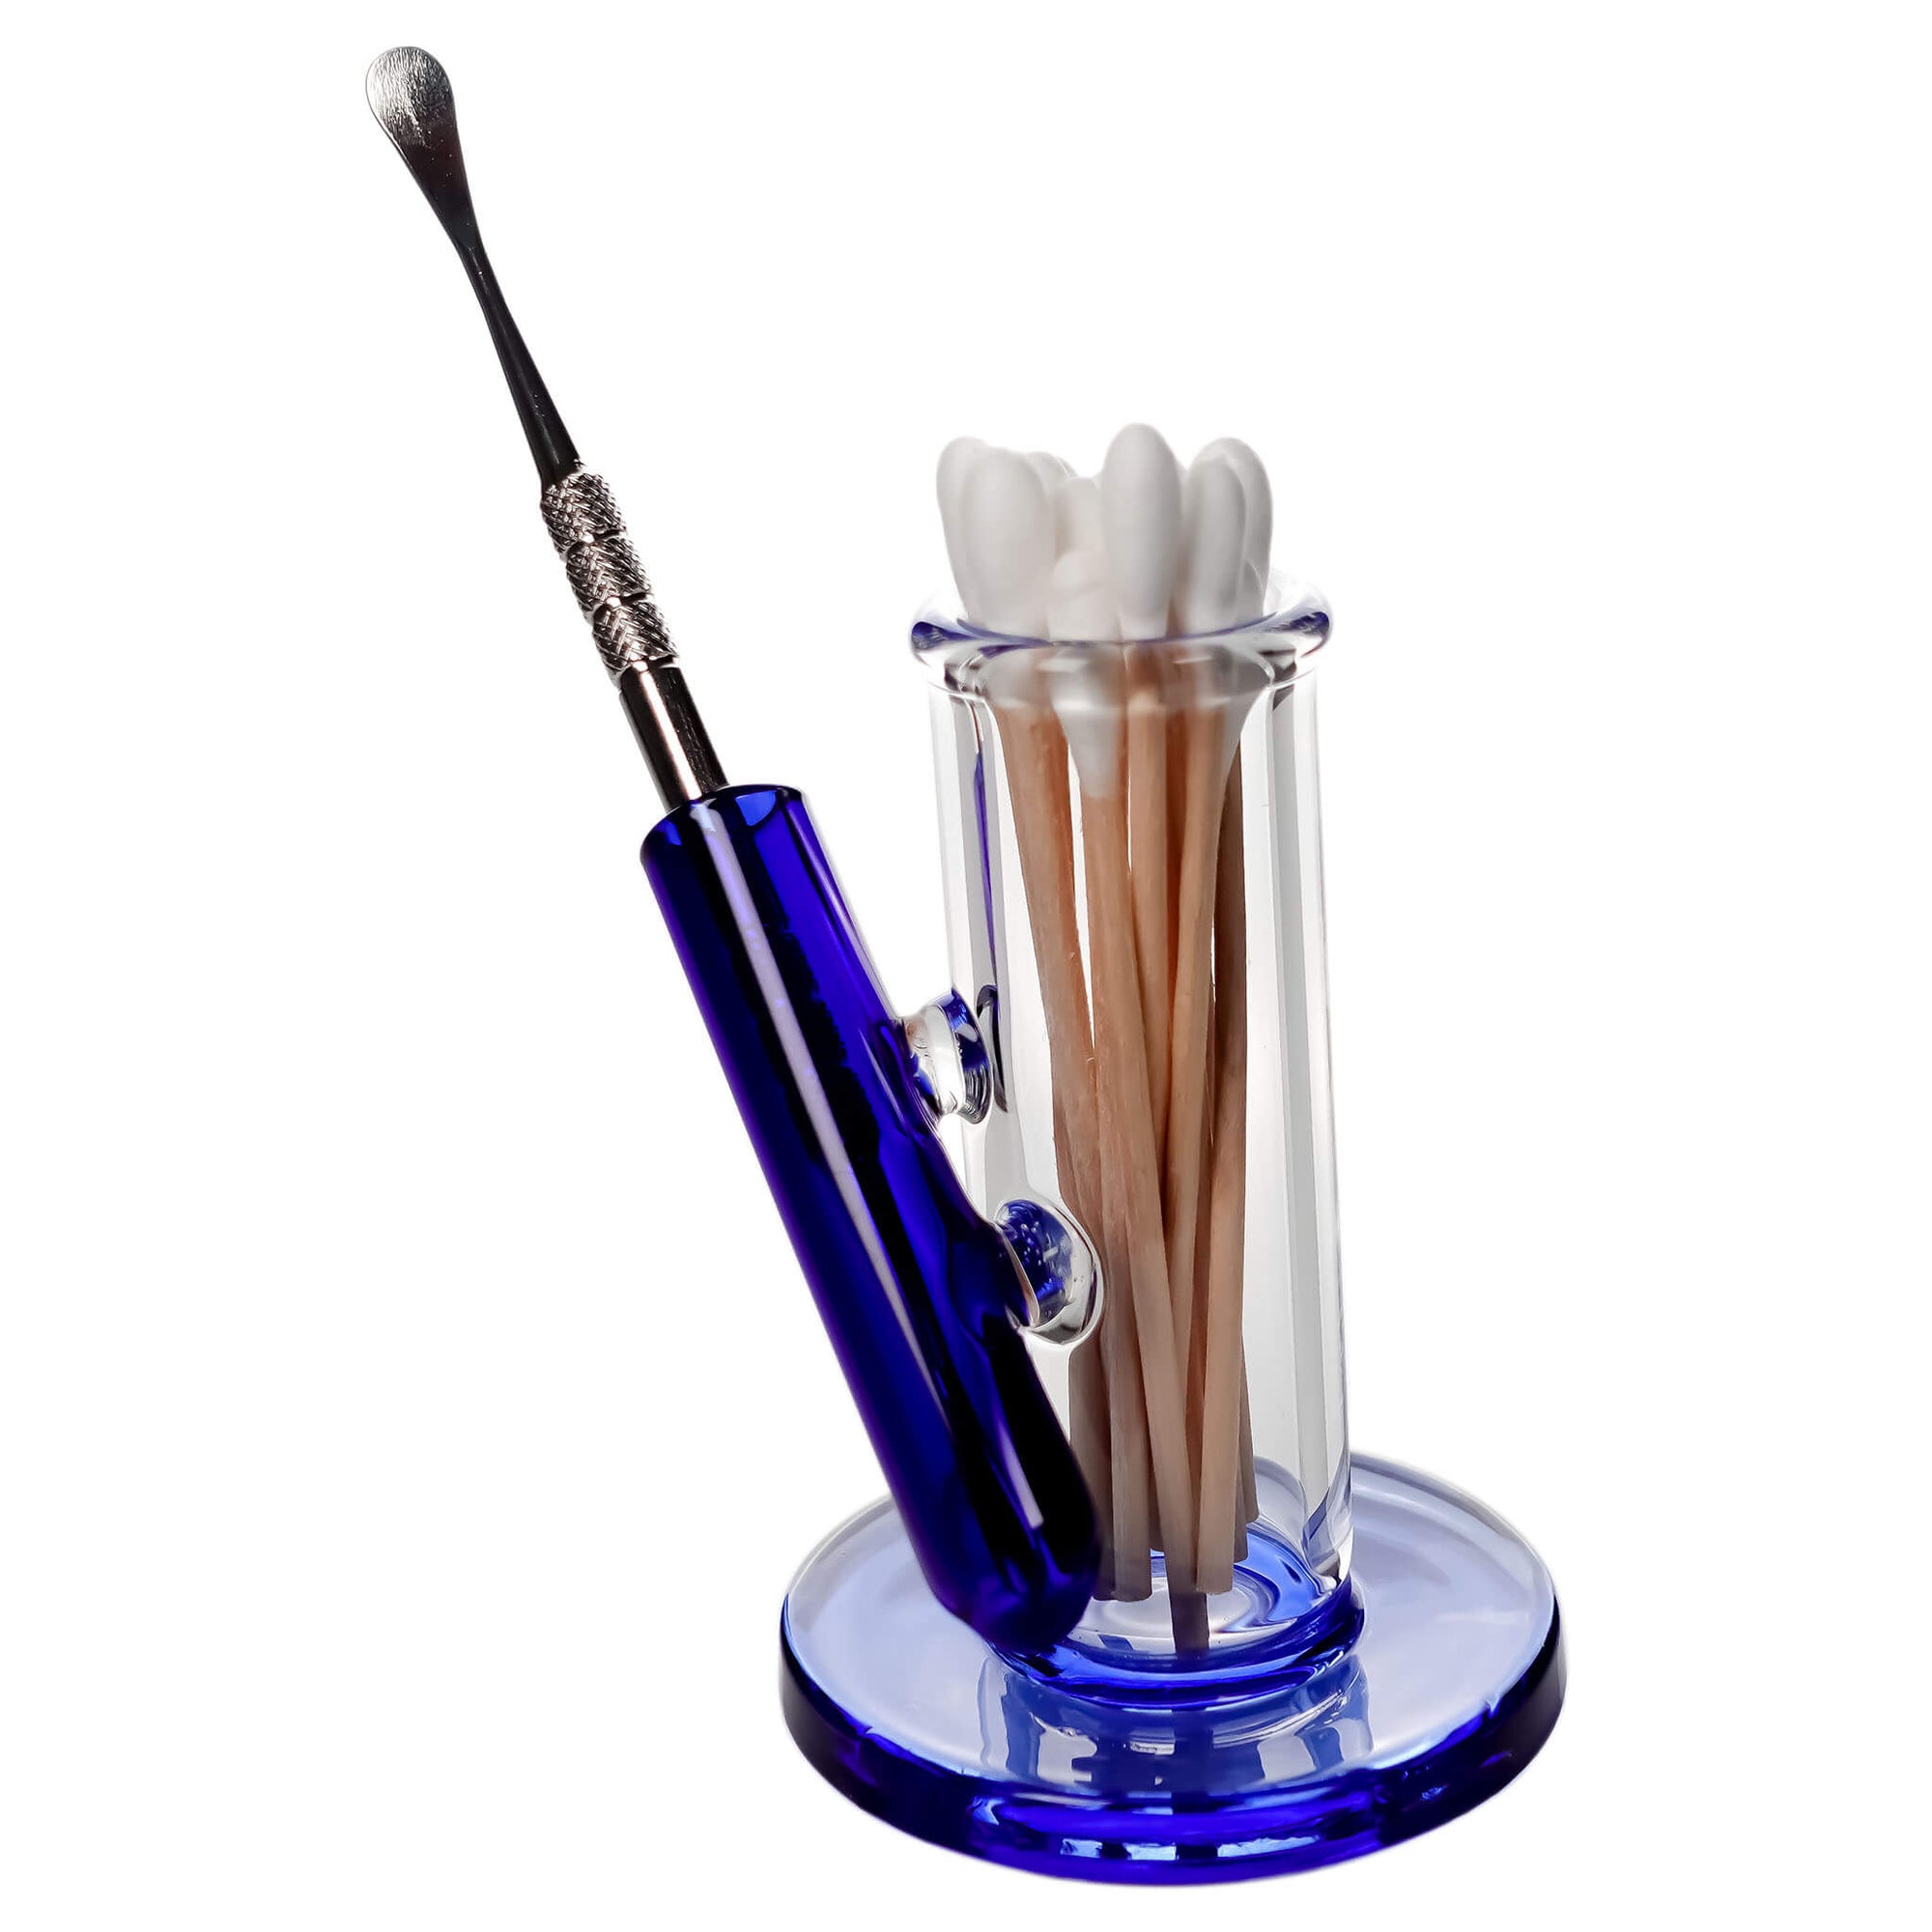 Dabber Tool Set All-In-One Case